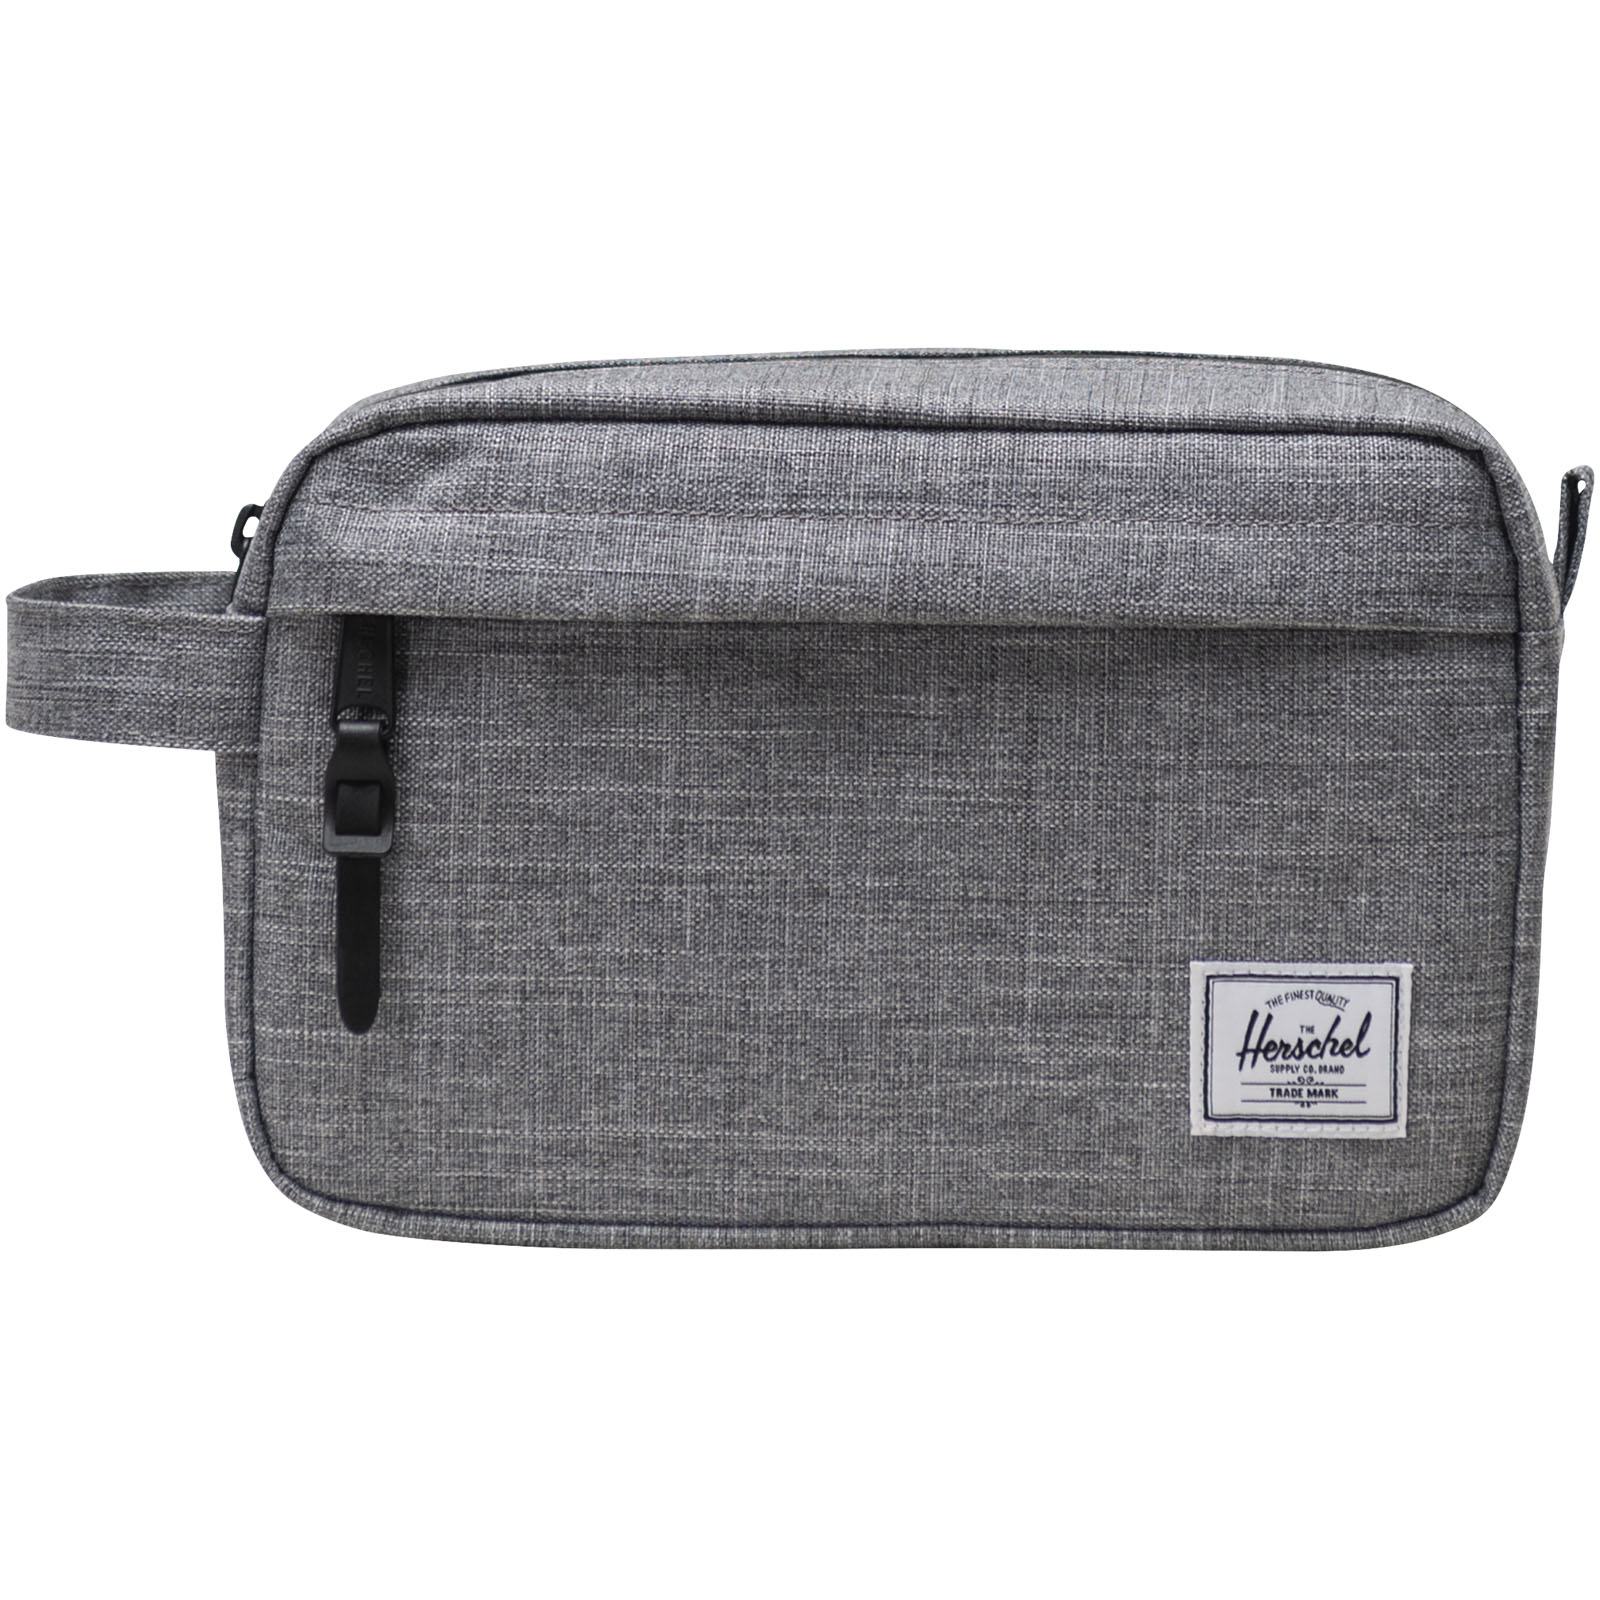 Advertising Toiletry Bags - Herschel Chapter recycled travel kit - 1